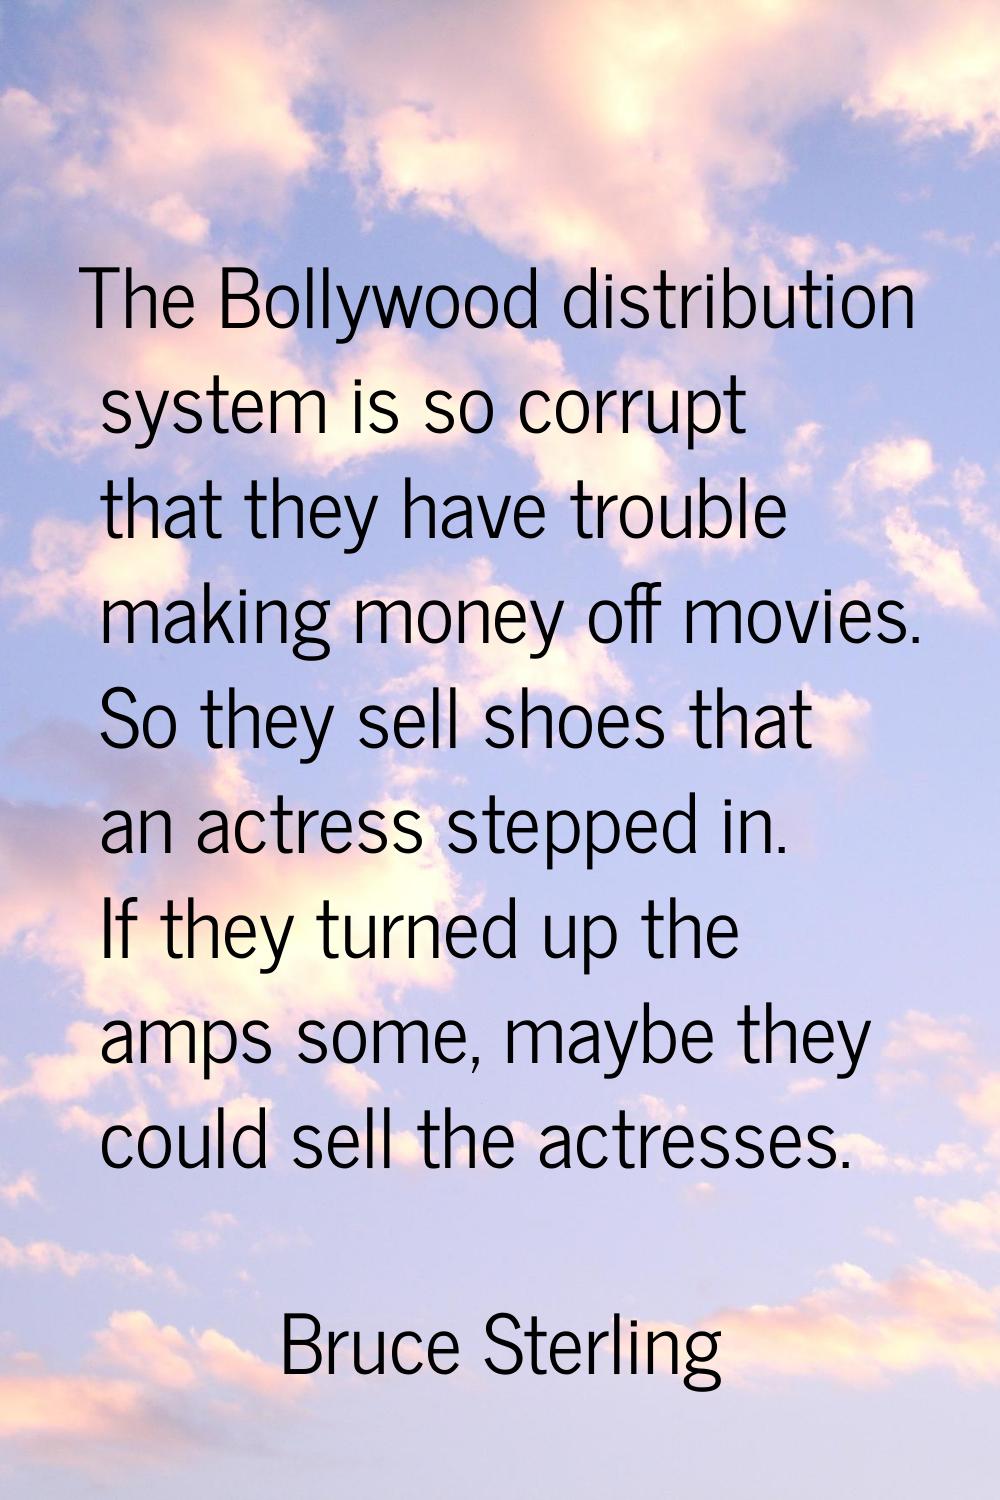 The Bollywood distribution system is so corrupt that they have trouble making money off movies. So 